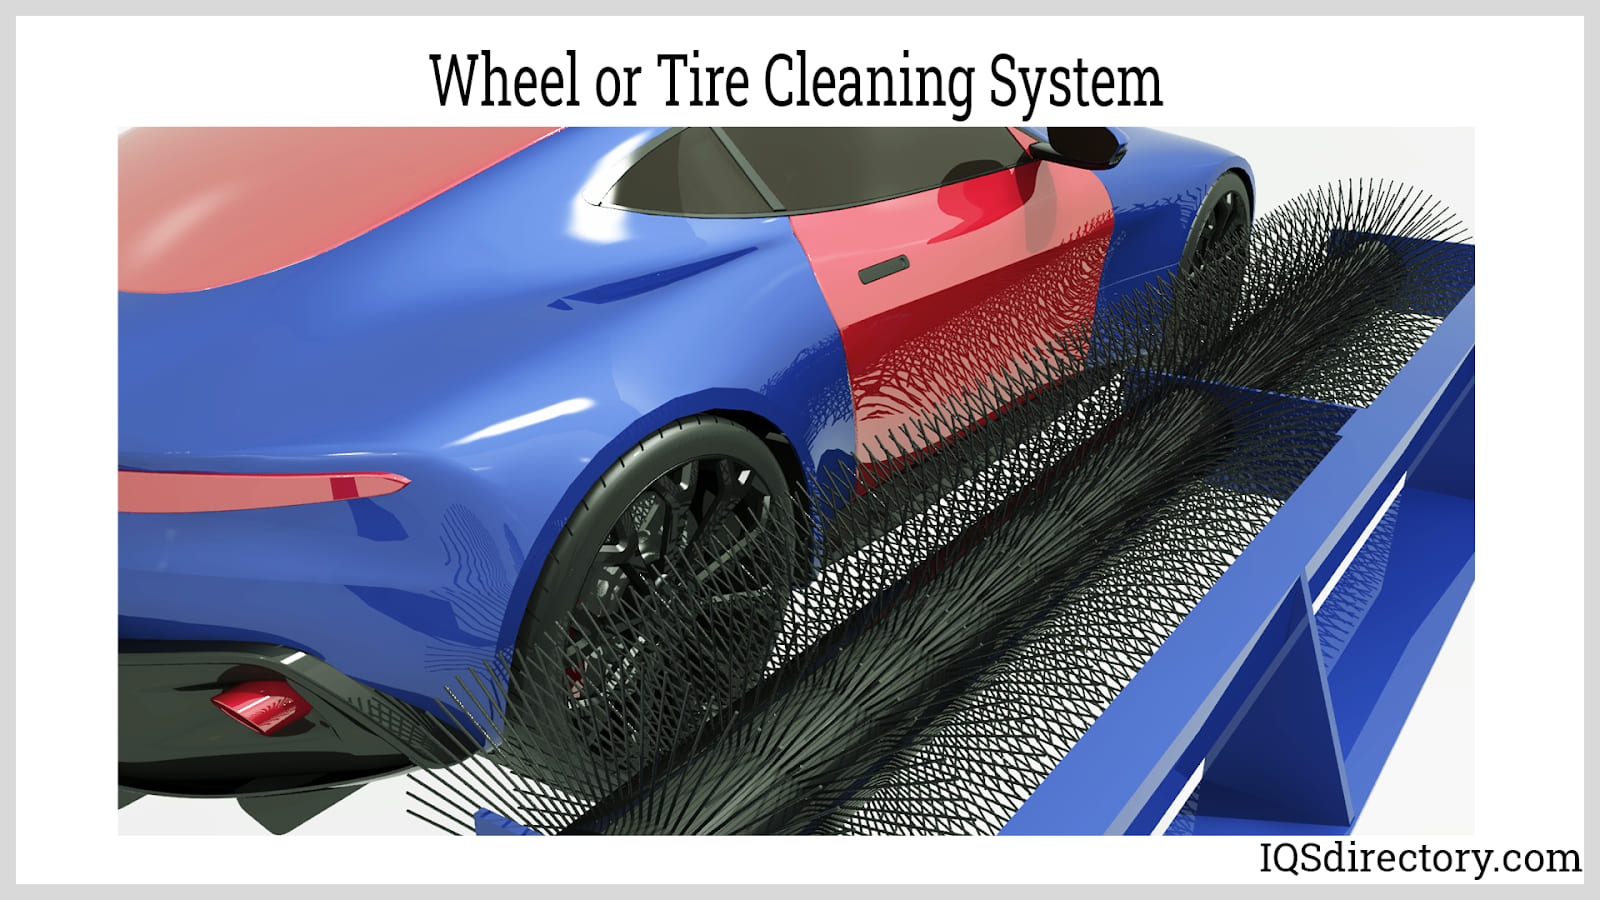 Wheel or Tire Cleaning System